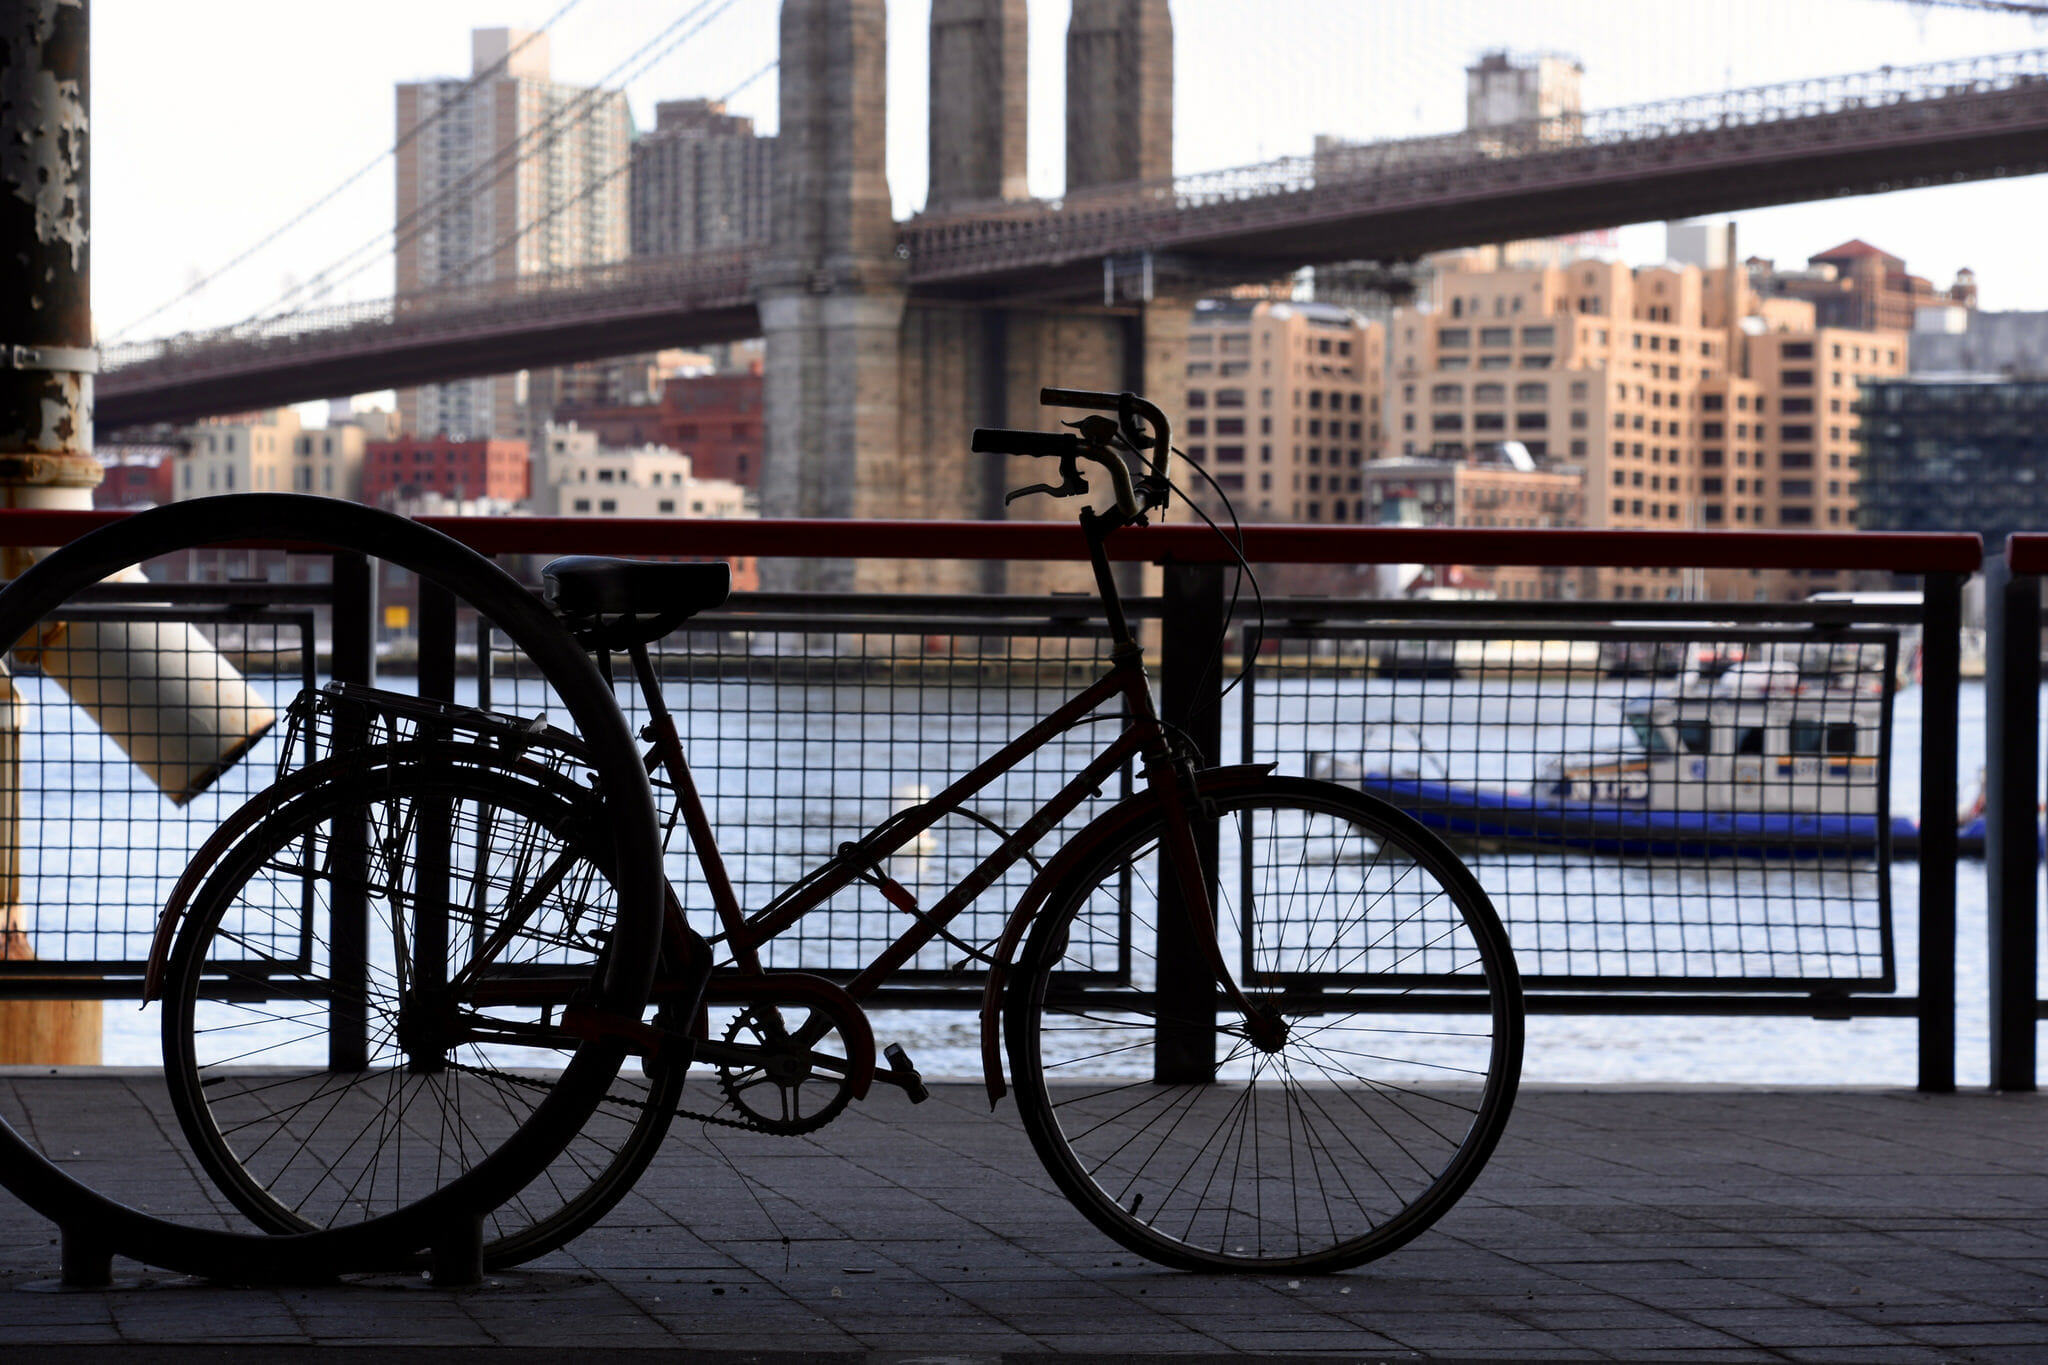 take a bike ride: 10 Fun and Frugal Things To Do in Manhattan